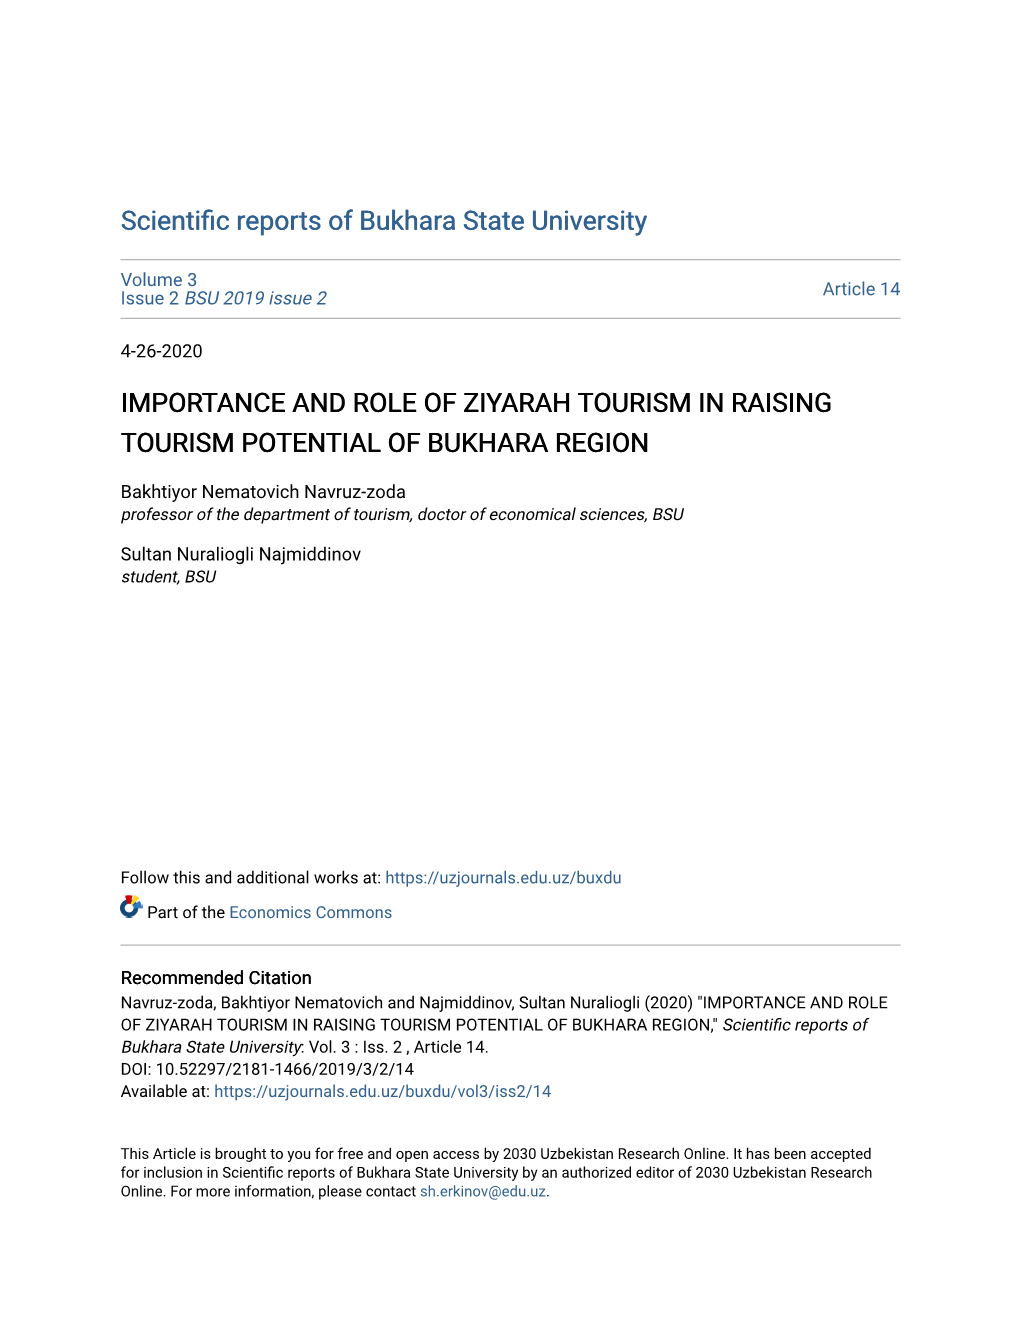 Importance and Role of Ziyarah Tourism in Raising Tourism Potential of Bukhara Region